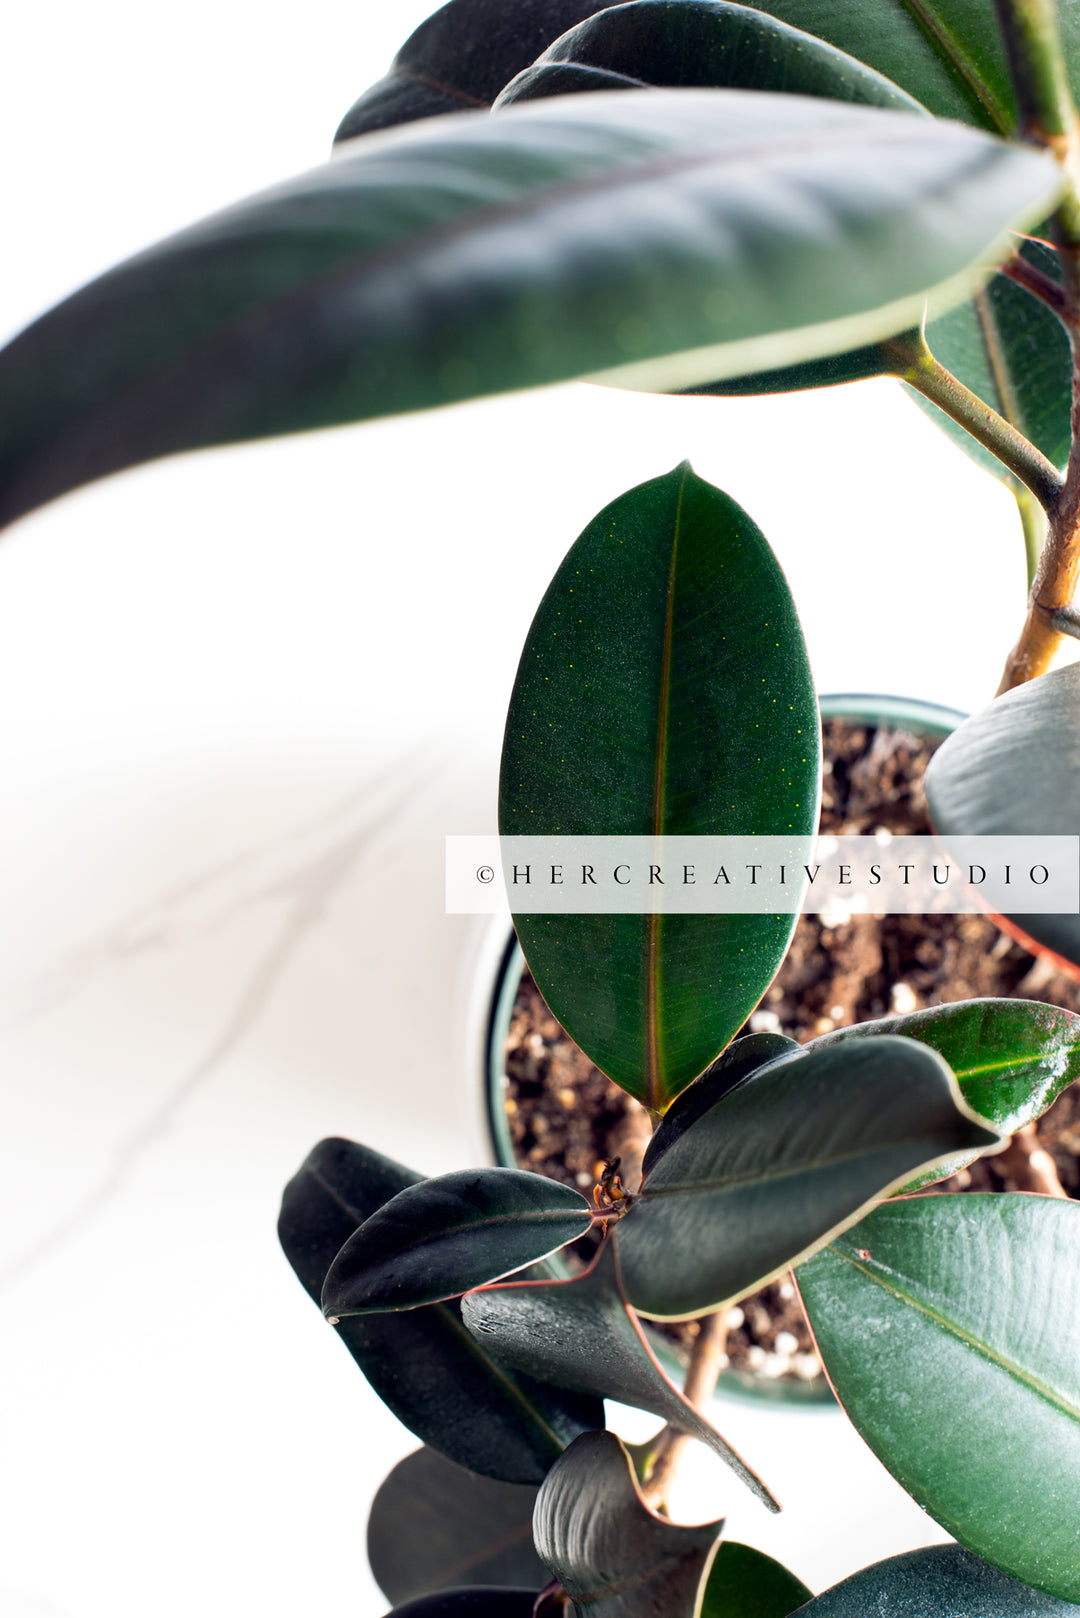 Green Rubber Plant, Styled Stock Image